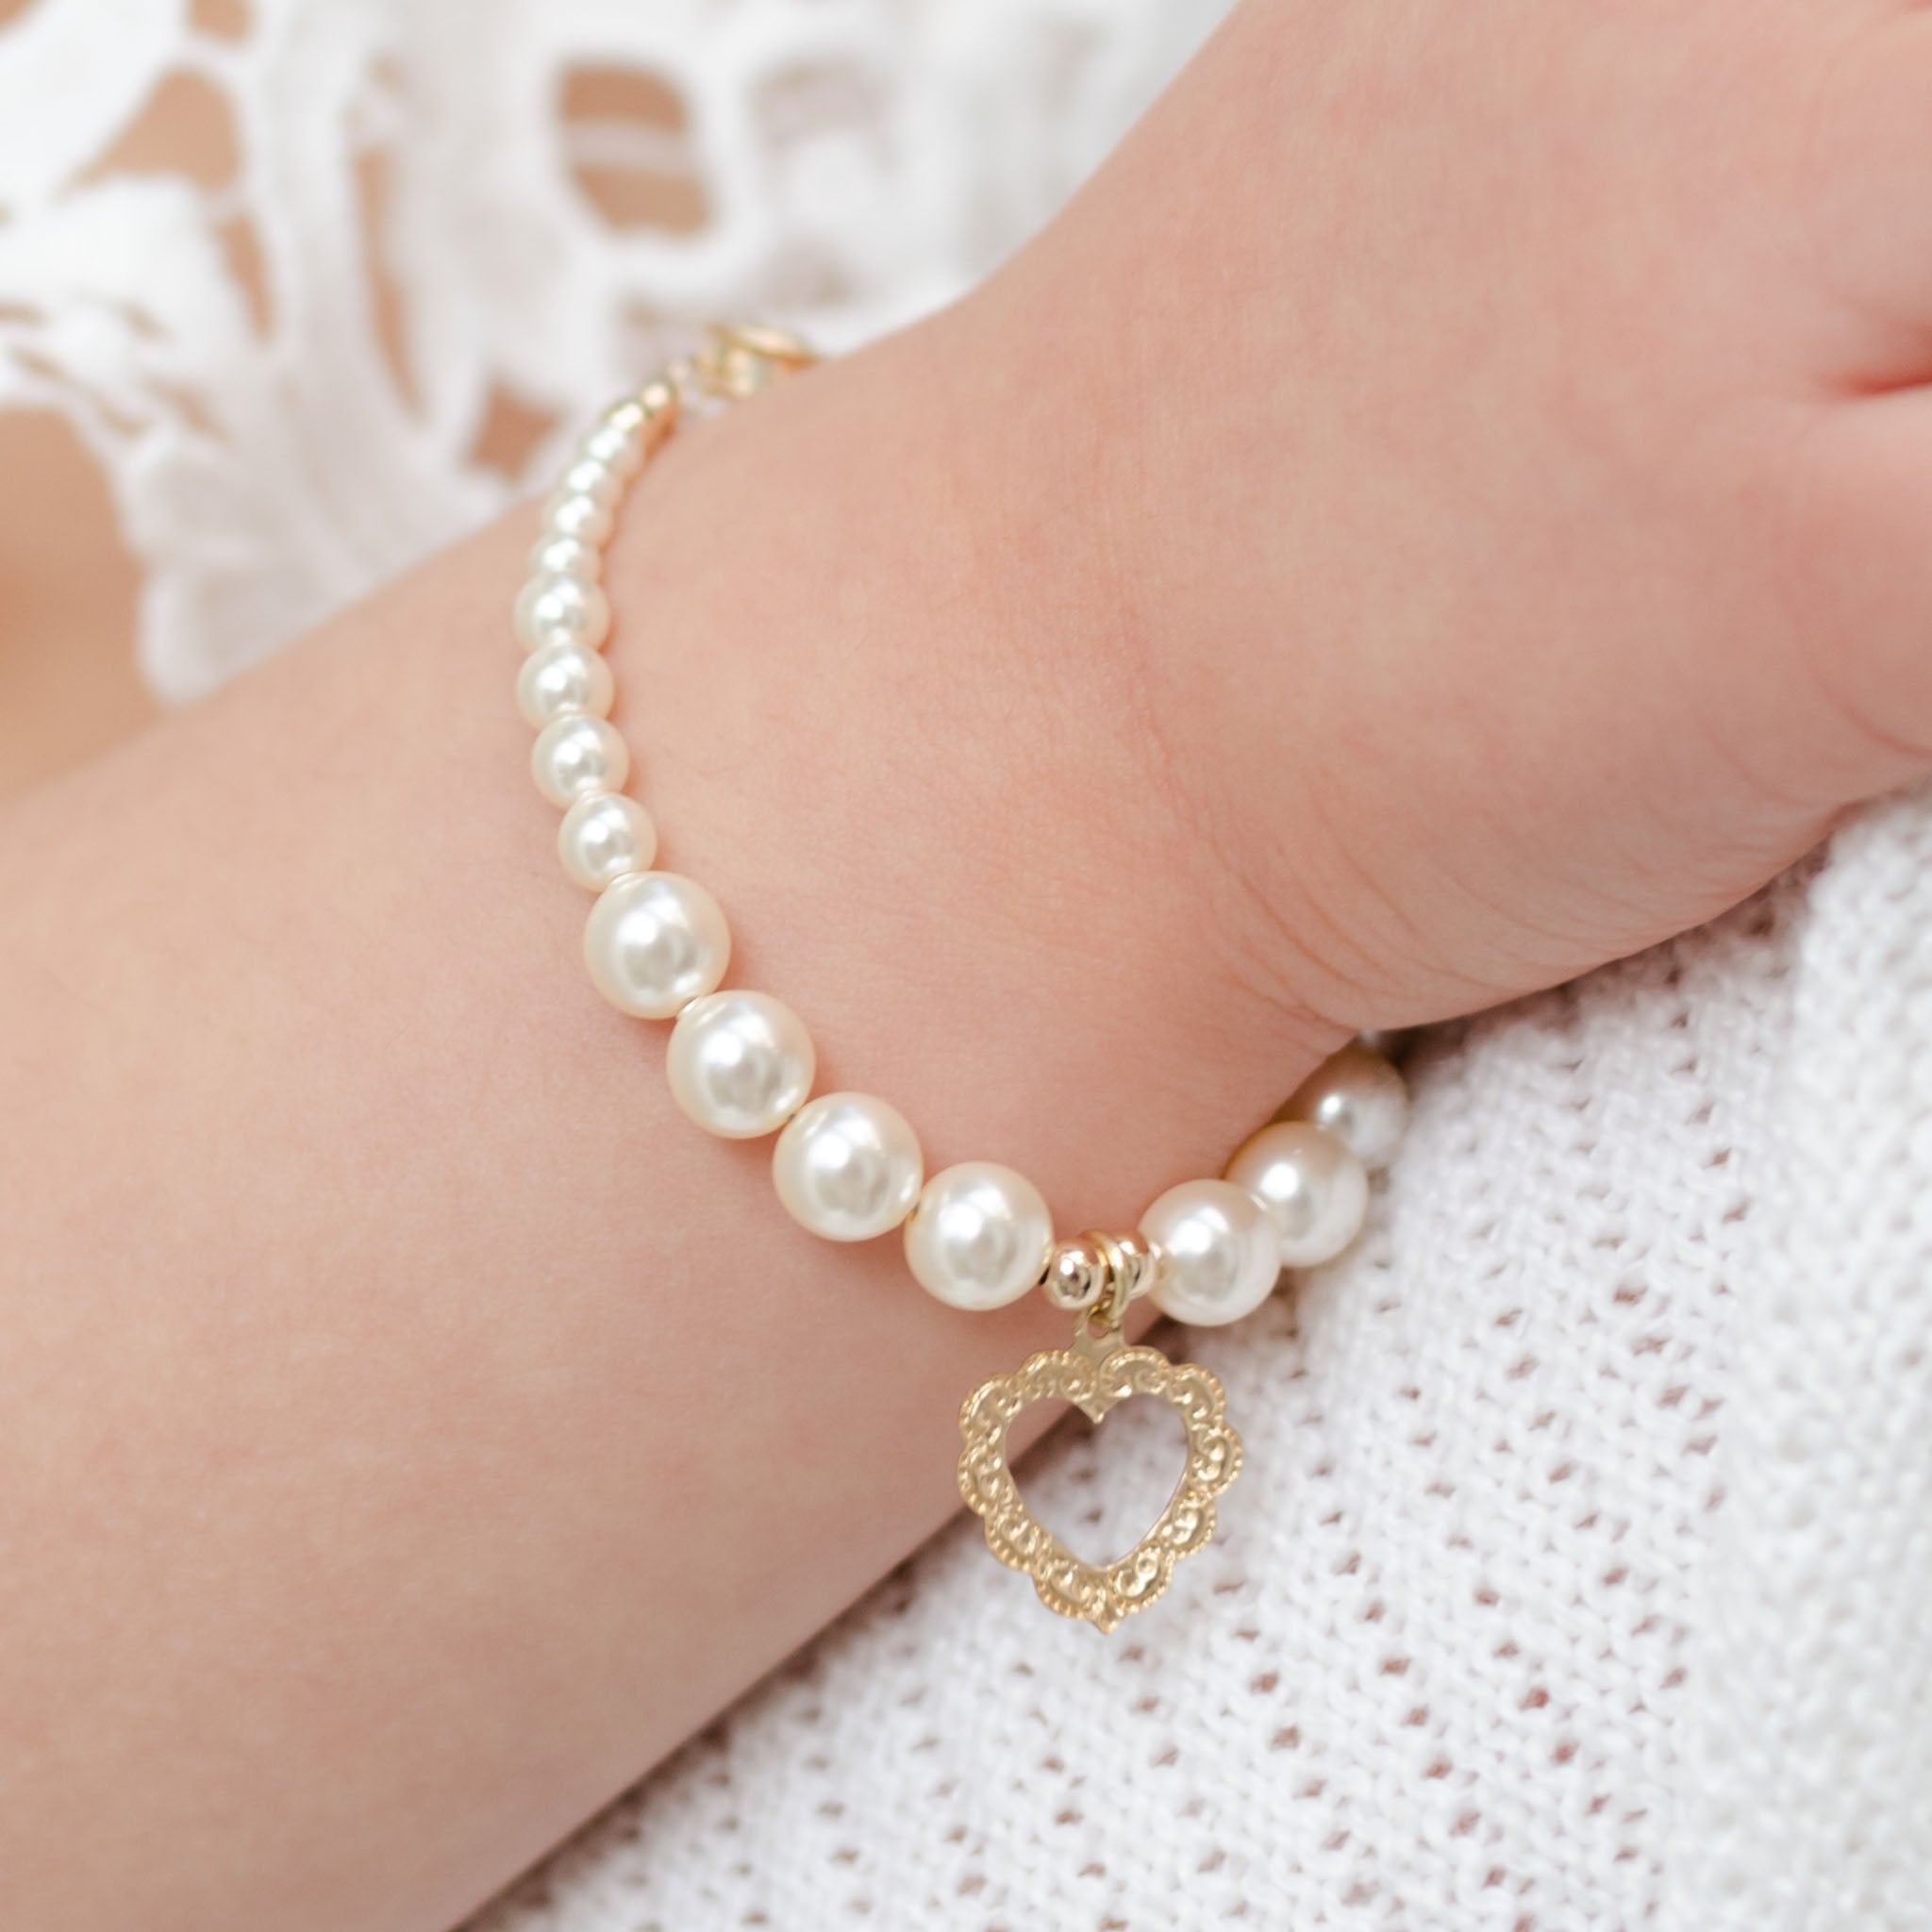 AKA Pearl Bracelet with Life Member Charm – Rosa's Greek Boutique, Inc.